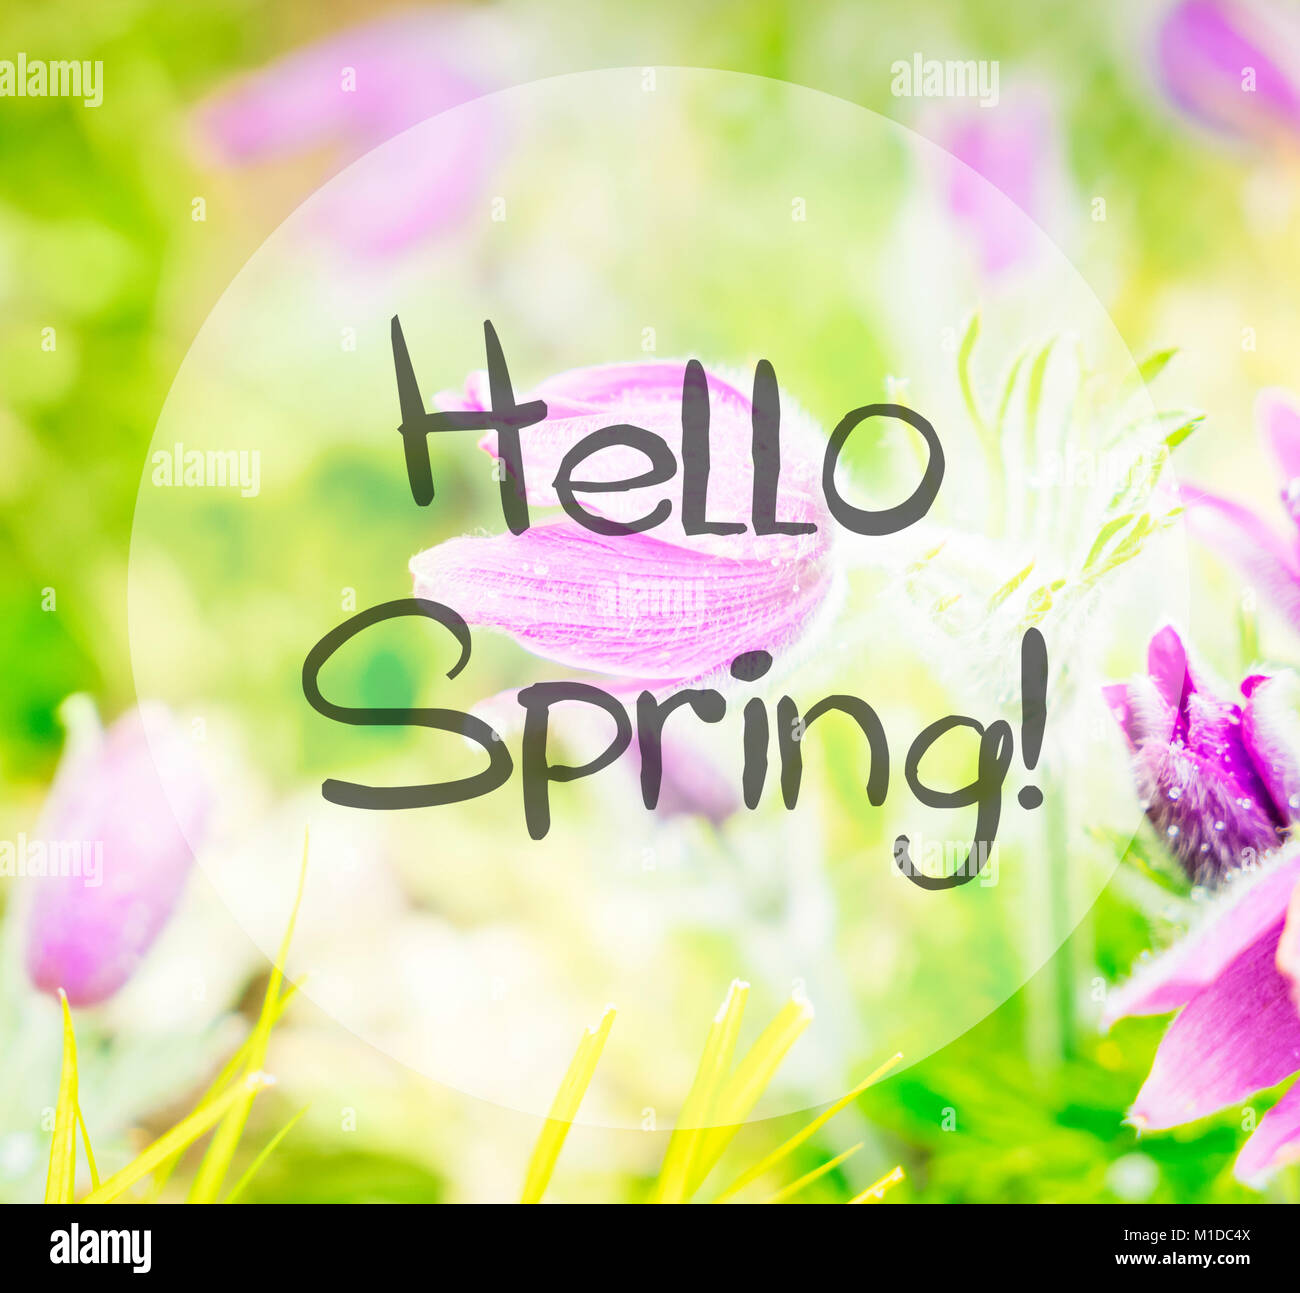 Spring Anemone violet flowers in green garden with hello spring words Stock Photo